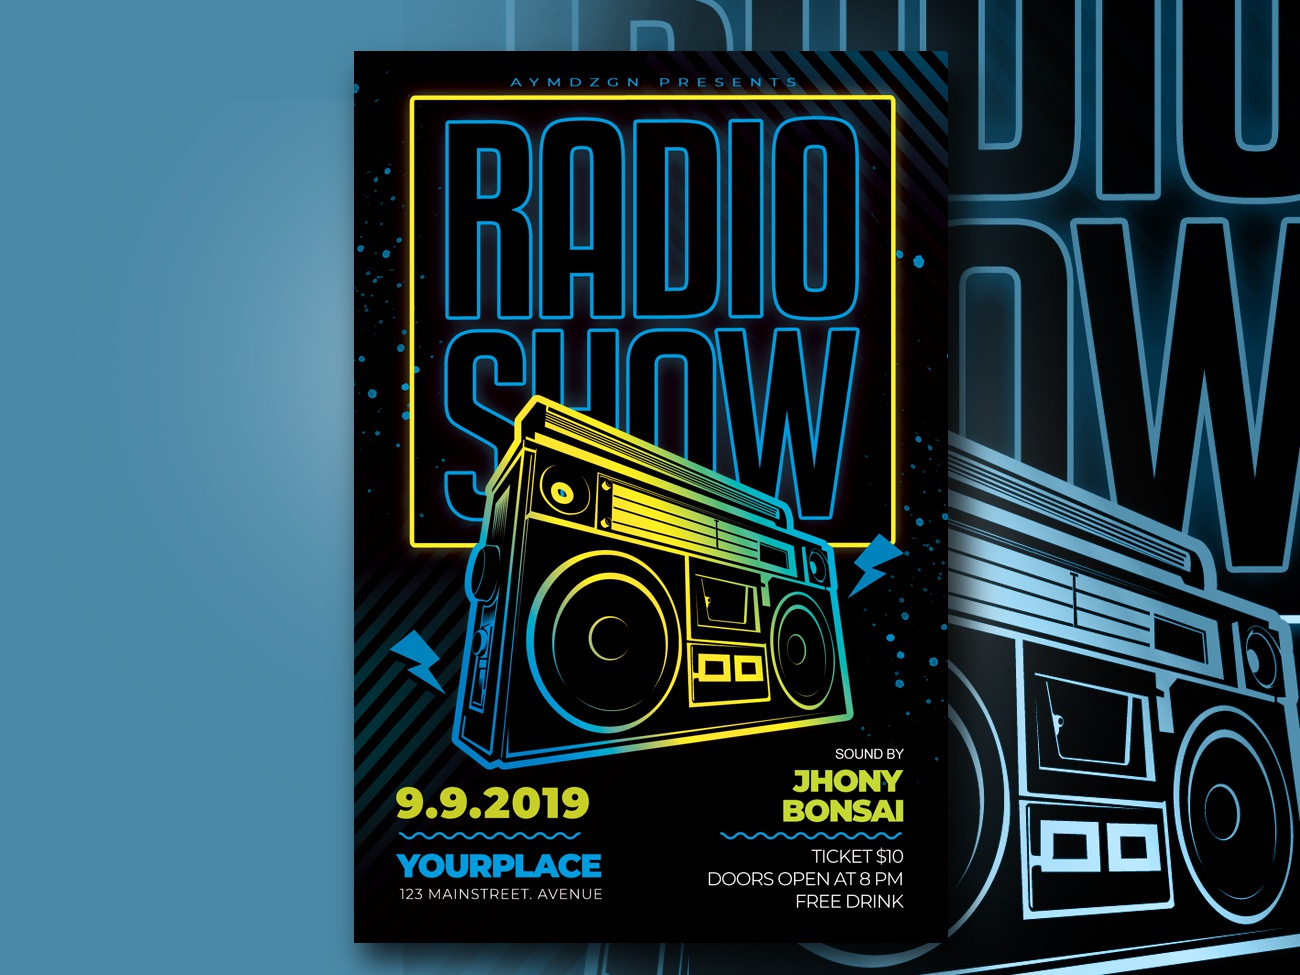 Radio Show Flyer Template by AyumaDesign on Dribbble With Regard To Radio Show Flyer Template Intended For Radio Show Flyer Template